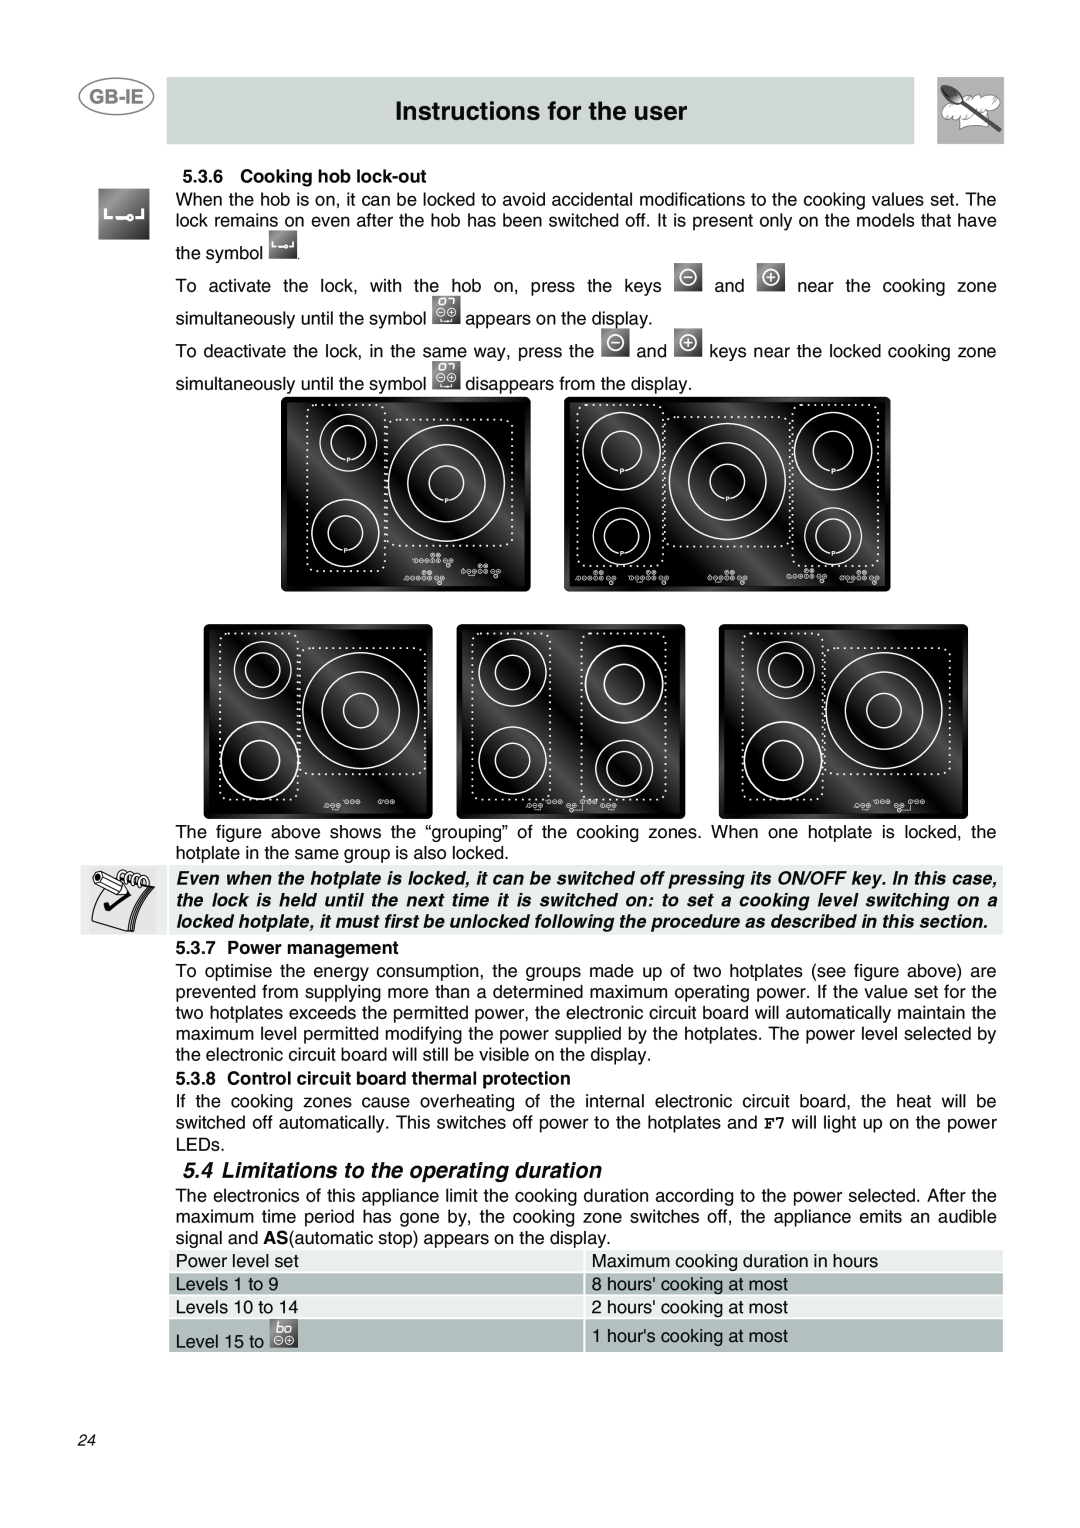 Smeg SE2320ID1 Limitations to the operating duration, Instructions for the user, Cooking hob lock-out, Power management 